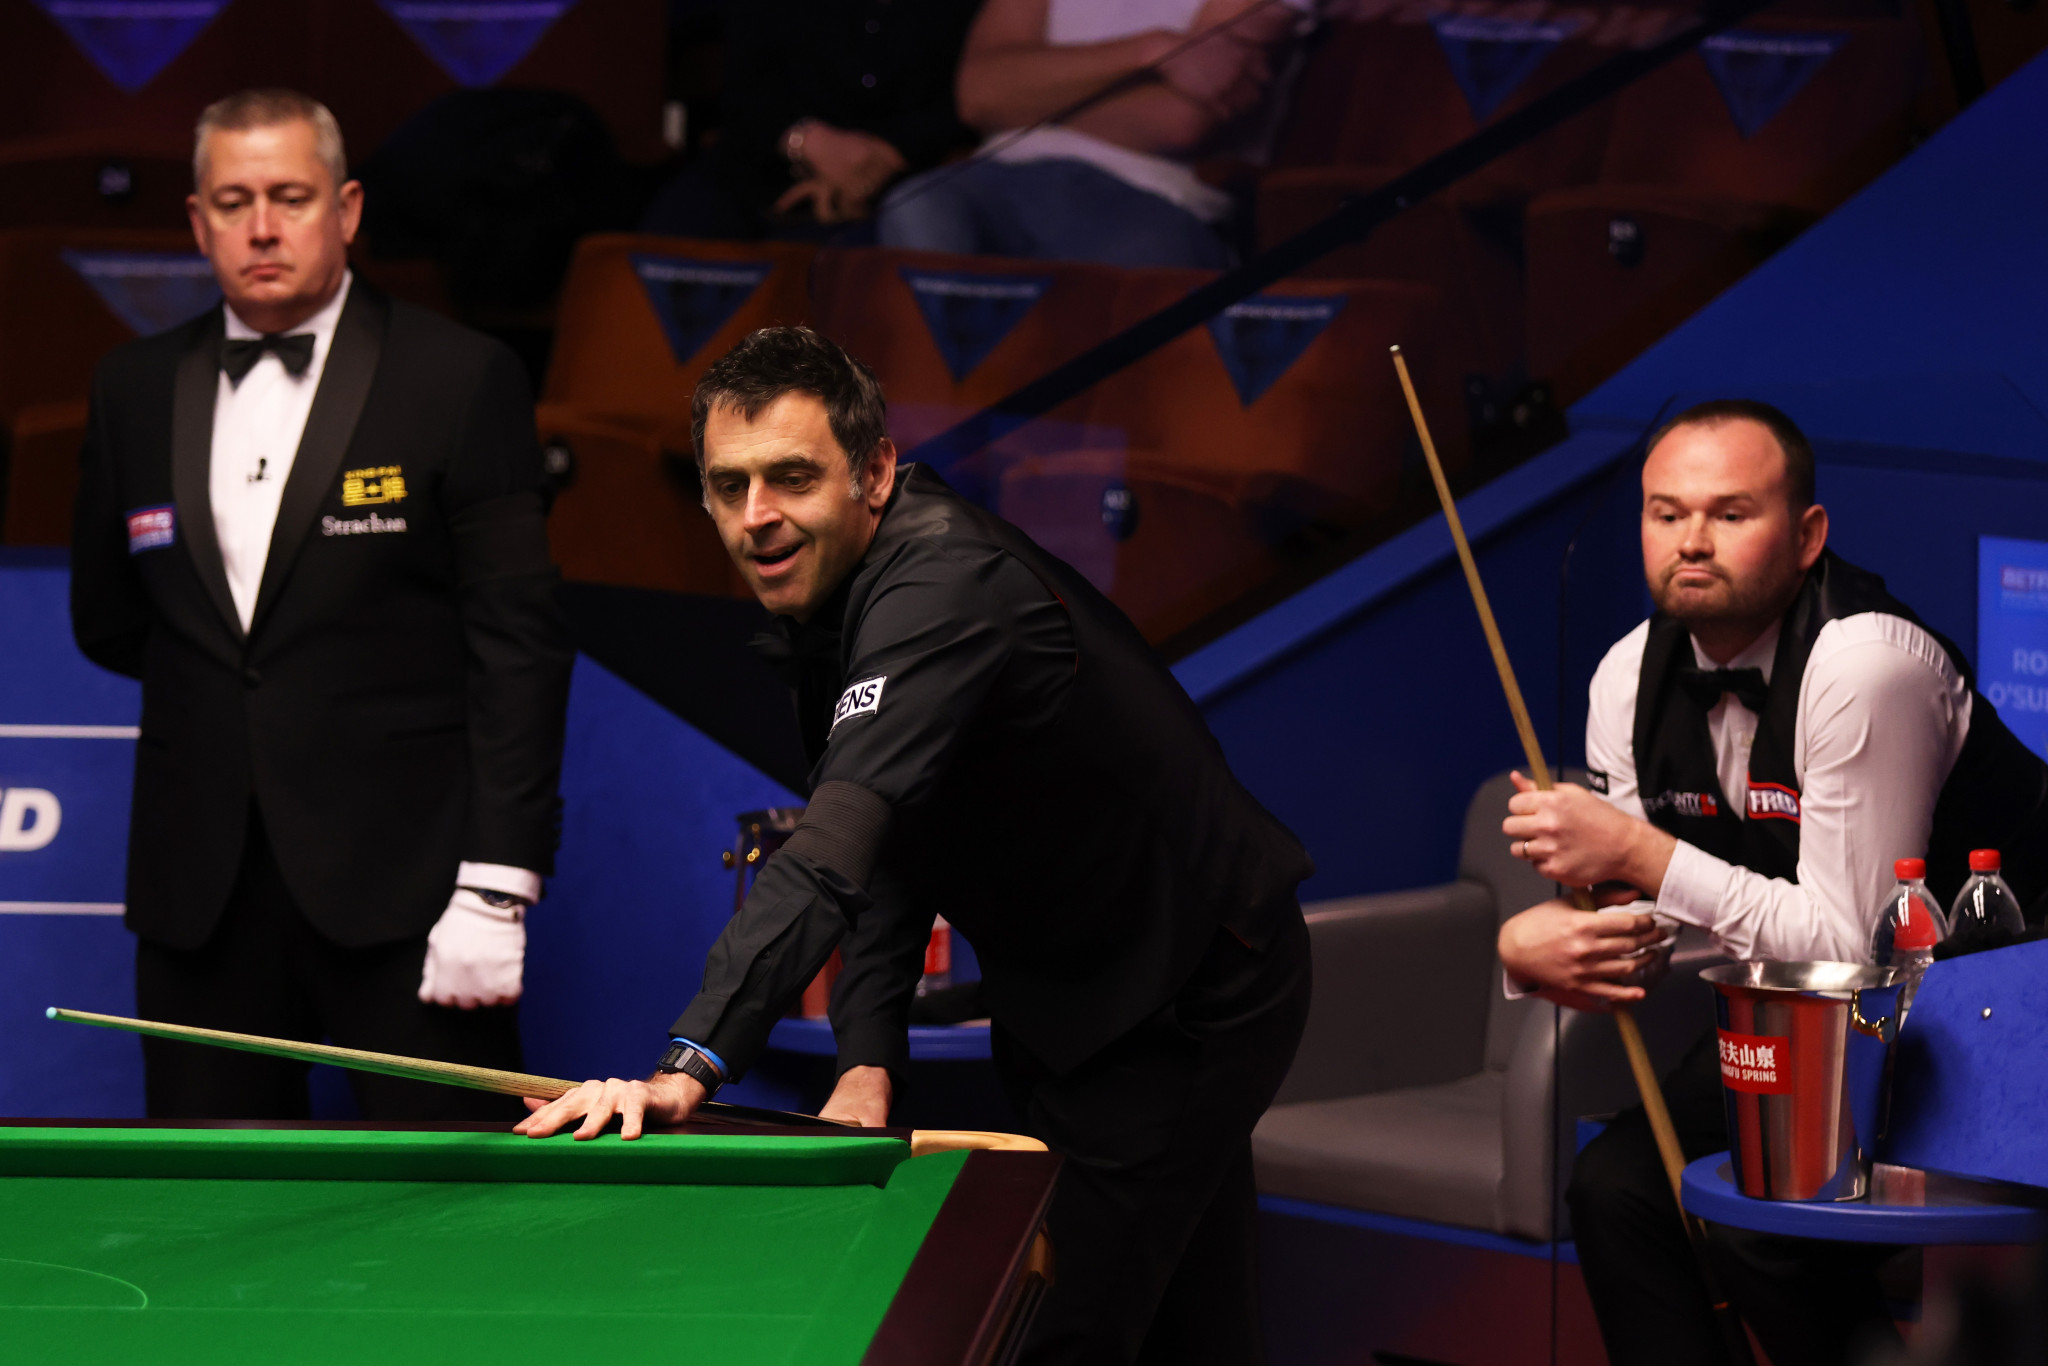 Ronnie O'Sullivan reached round two of the World Snooker Championship today finishing his match against Mark Joyce with three successive centuries ©Getty Images